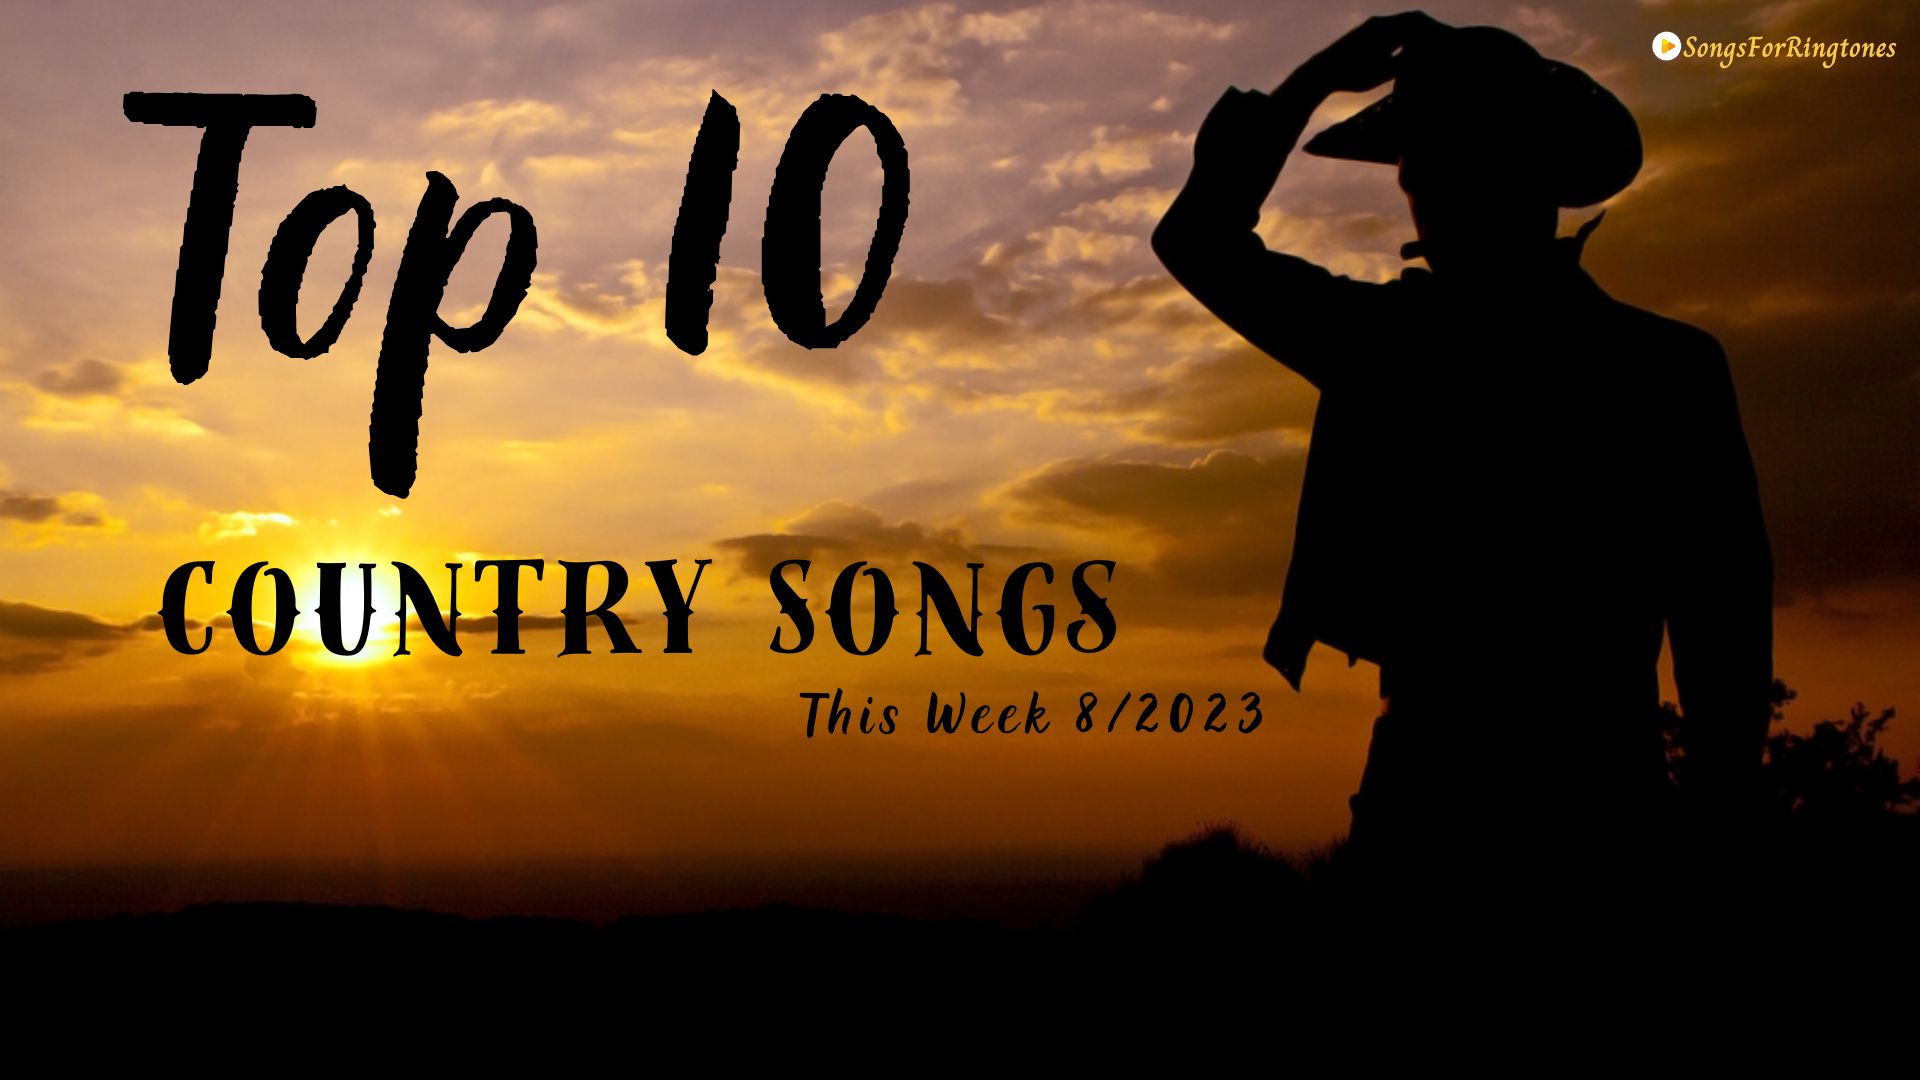 Top 10 Country Songs This Week (Updated 8/2023) The Hottest Tracks in